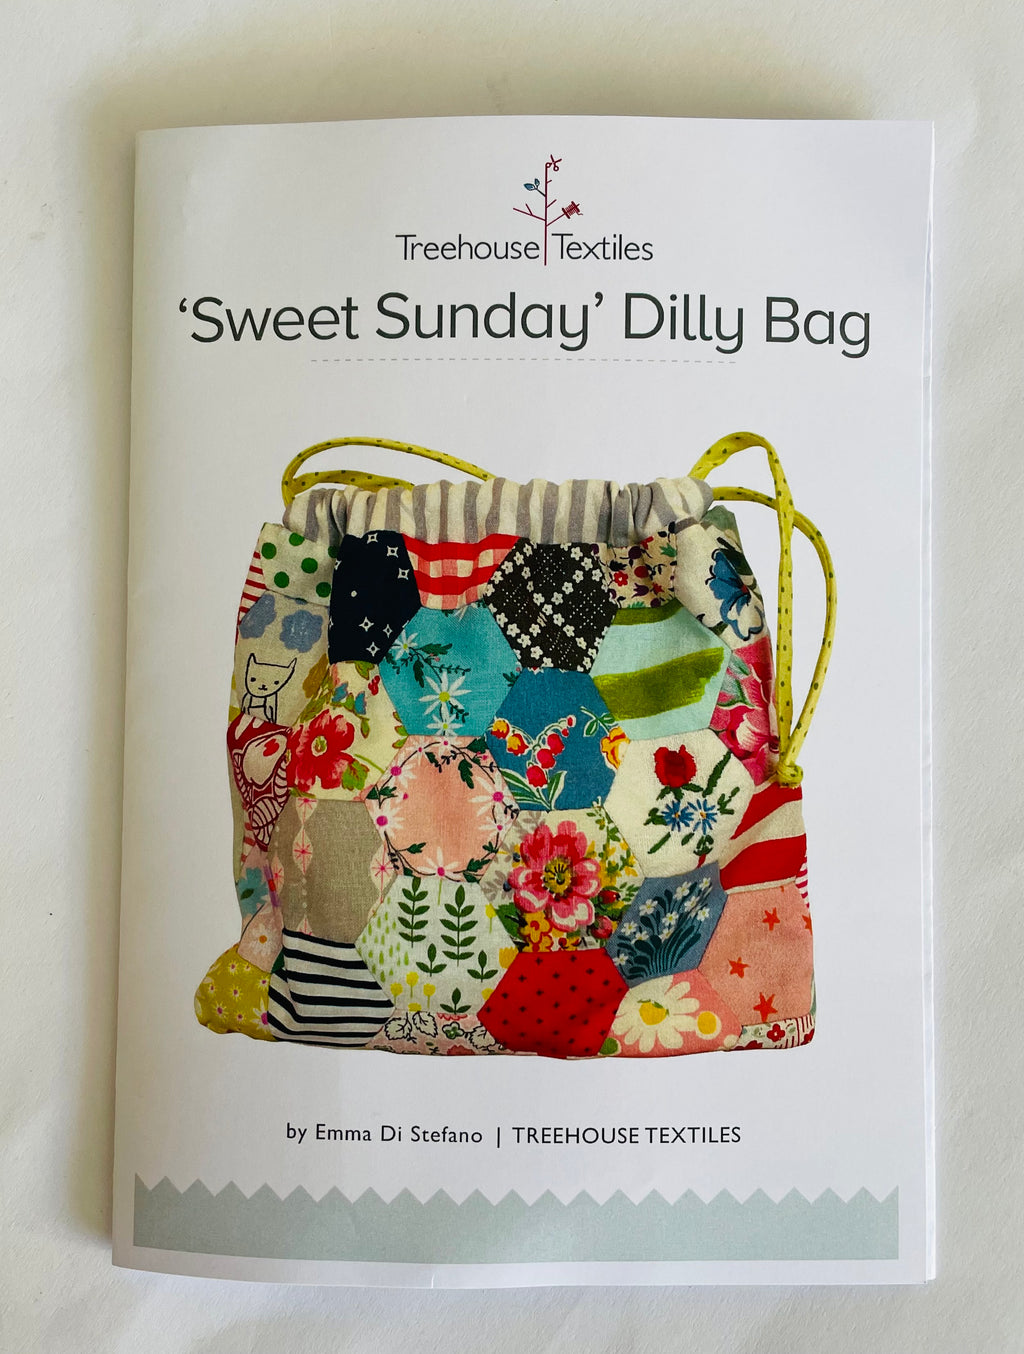 Treehouse Textiles/ "Sweet Sunday Bag pattern & template